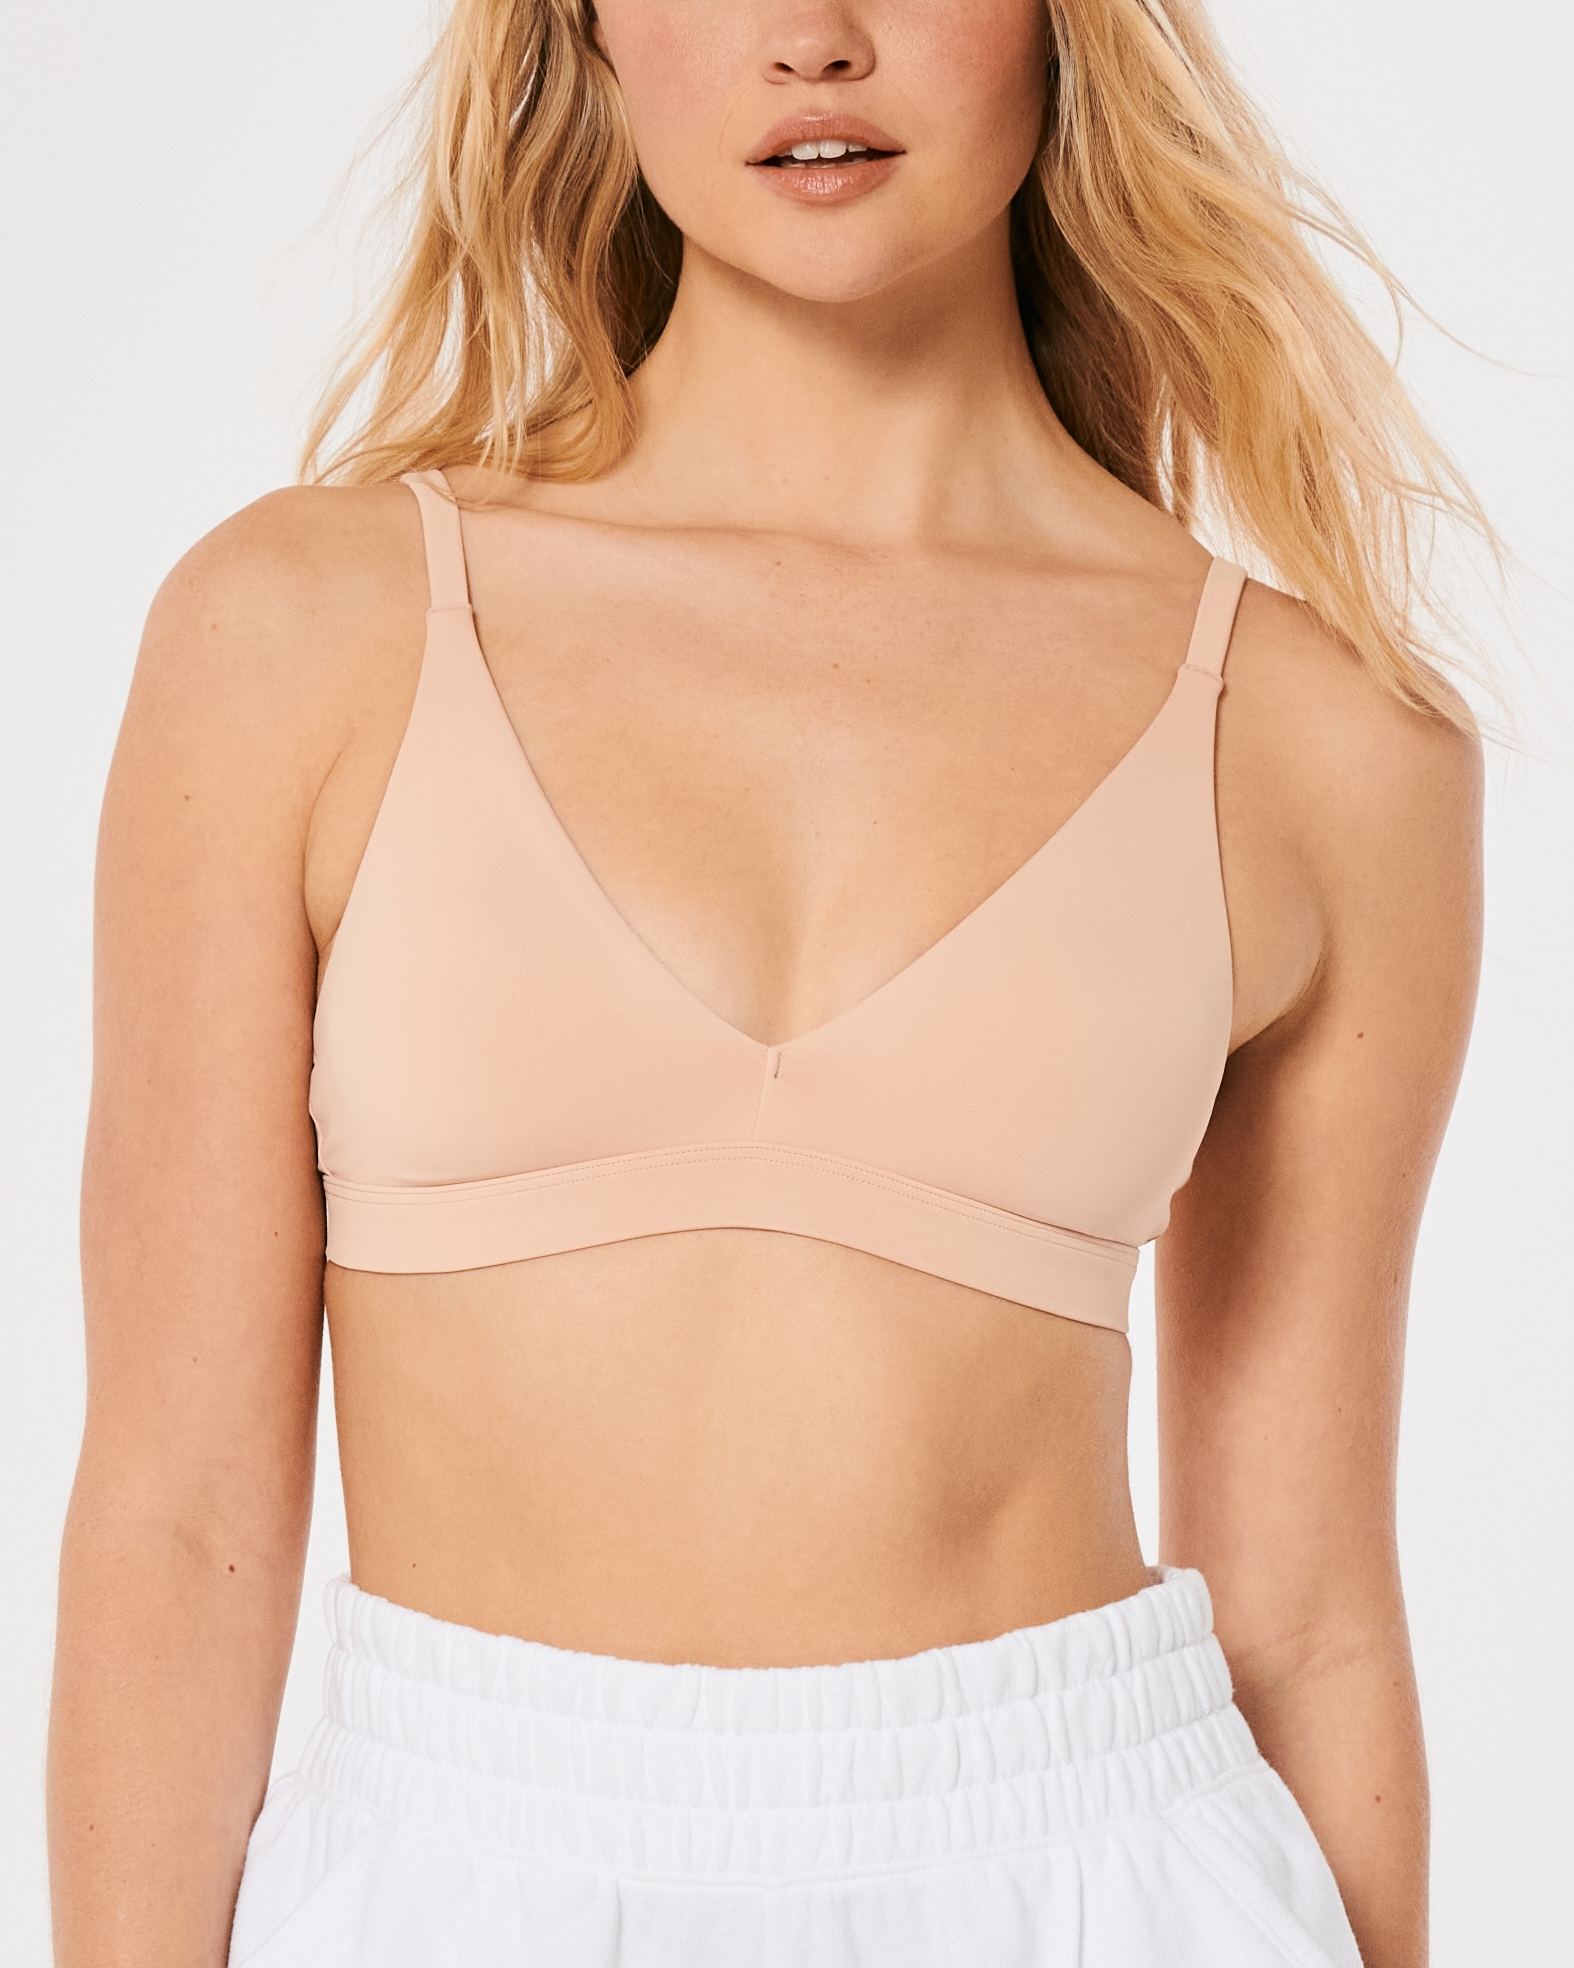 Hollister Halter Top With Built-In Bra - $10 - From stella